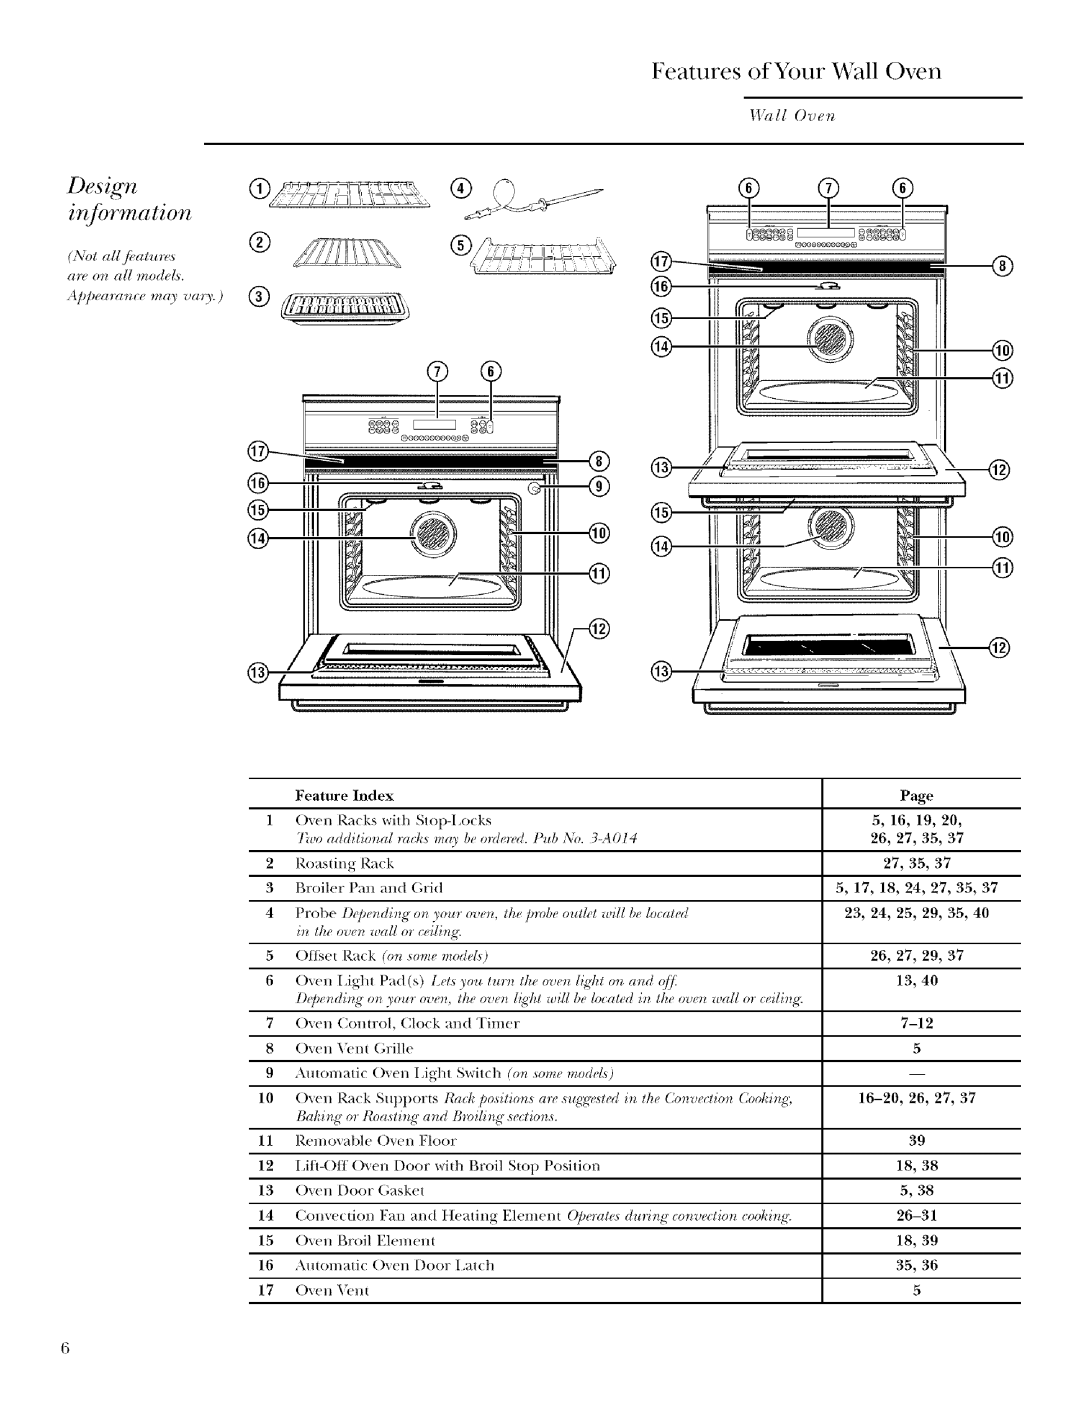 GE ZET958, ZET938 manual Design inJbrmation, Feature, Index, the probe, 23, 24, 25, 29, 35, o_t some 